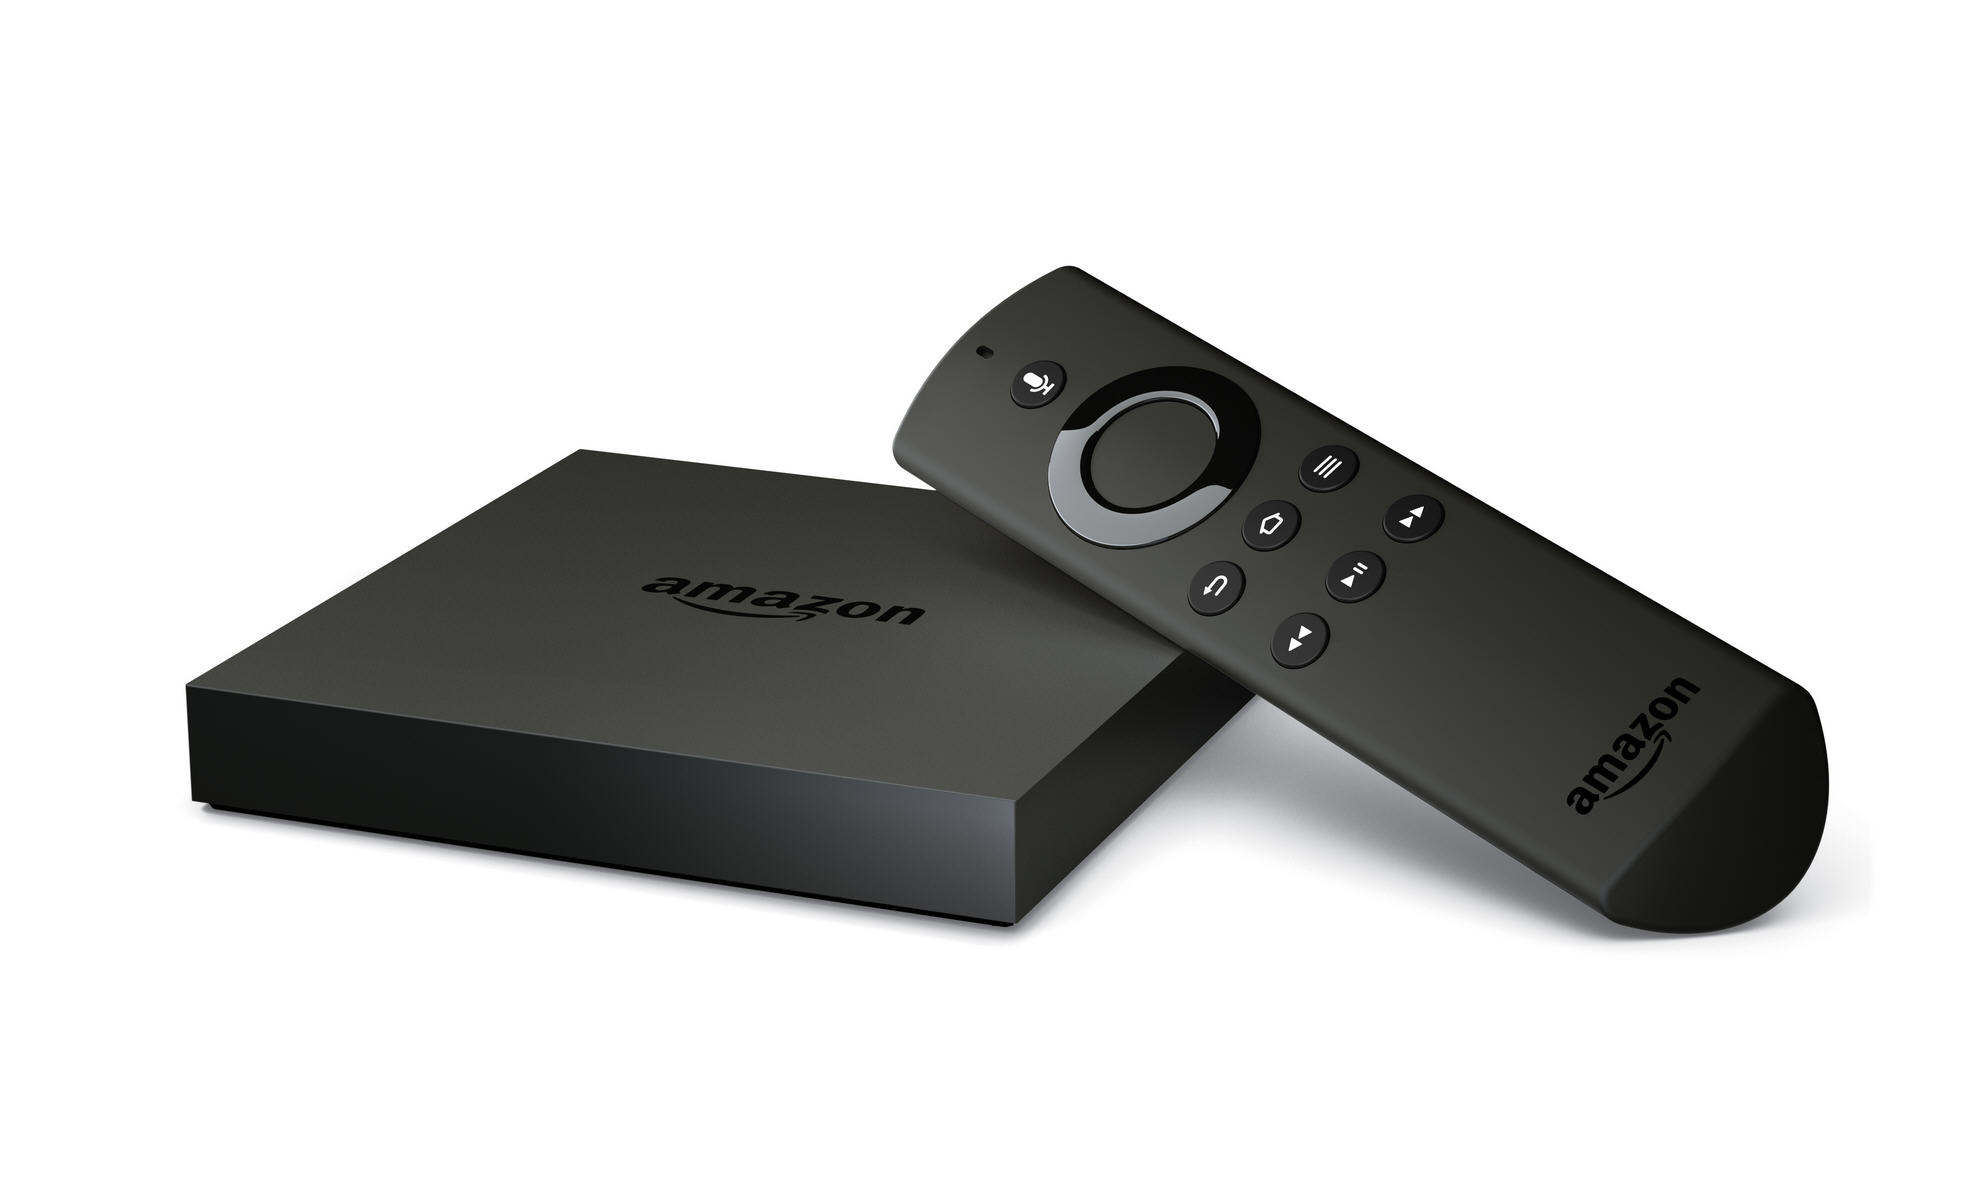 Amazon TV and Fire stick